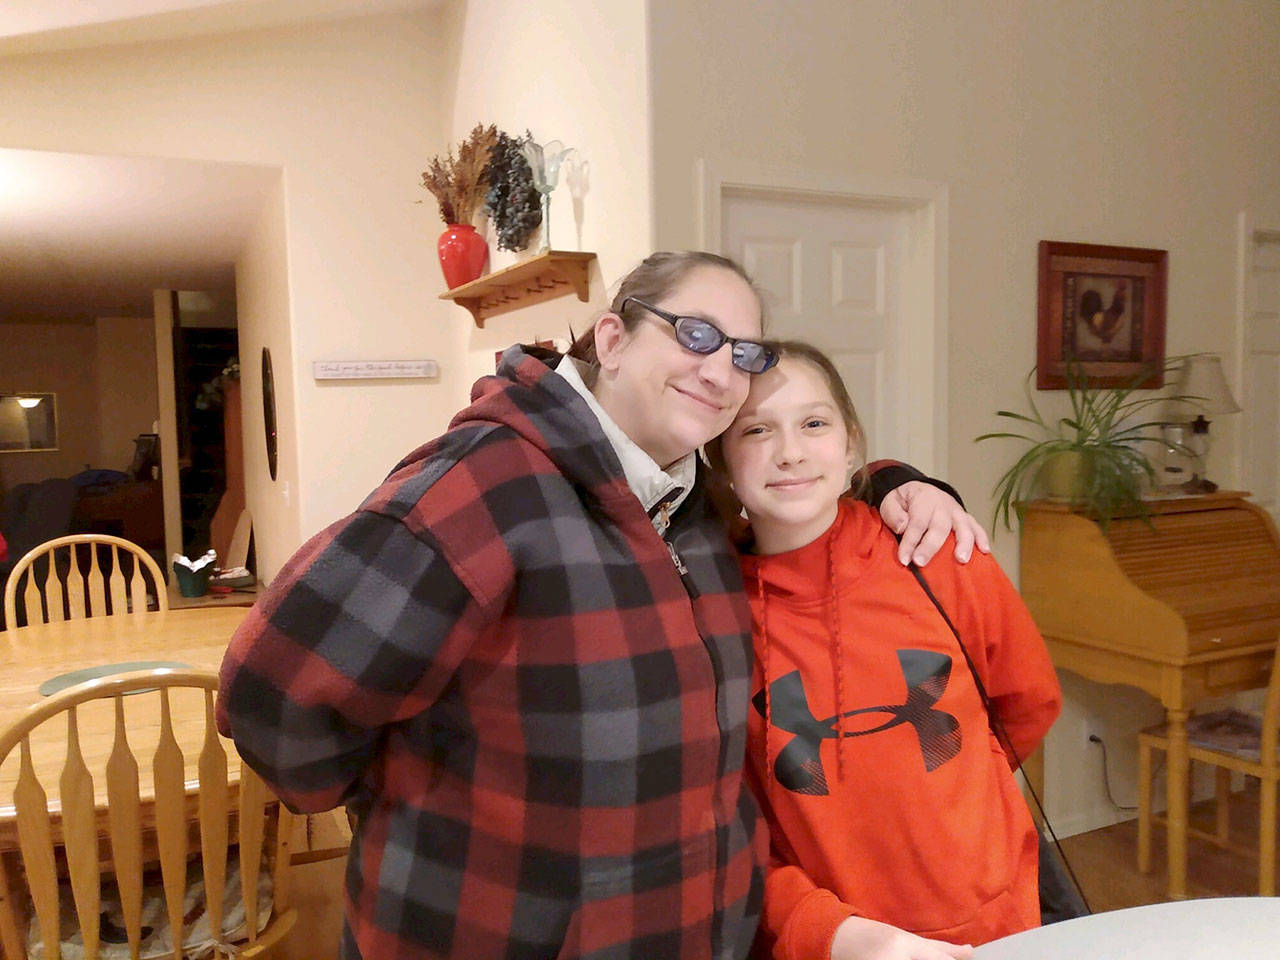 Apryle Shondelmeyer and her daughter Lyllian Moore were killed in a traffic collision near Sequim on Dec. 26. Fundraising campaigns have been set up to help Shondelmeyer’s family cover expenses.